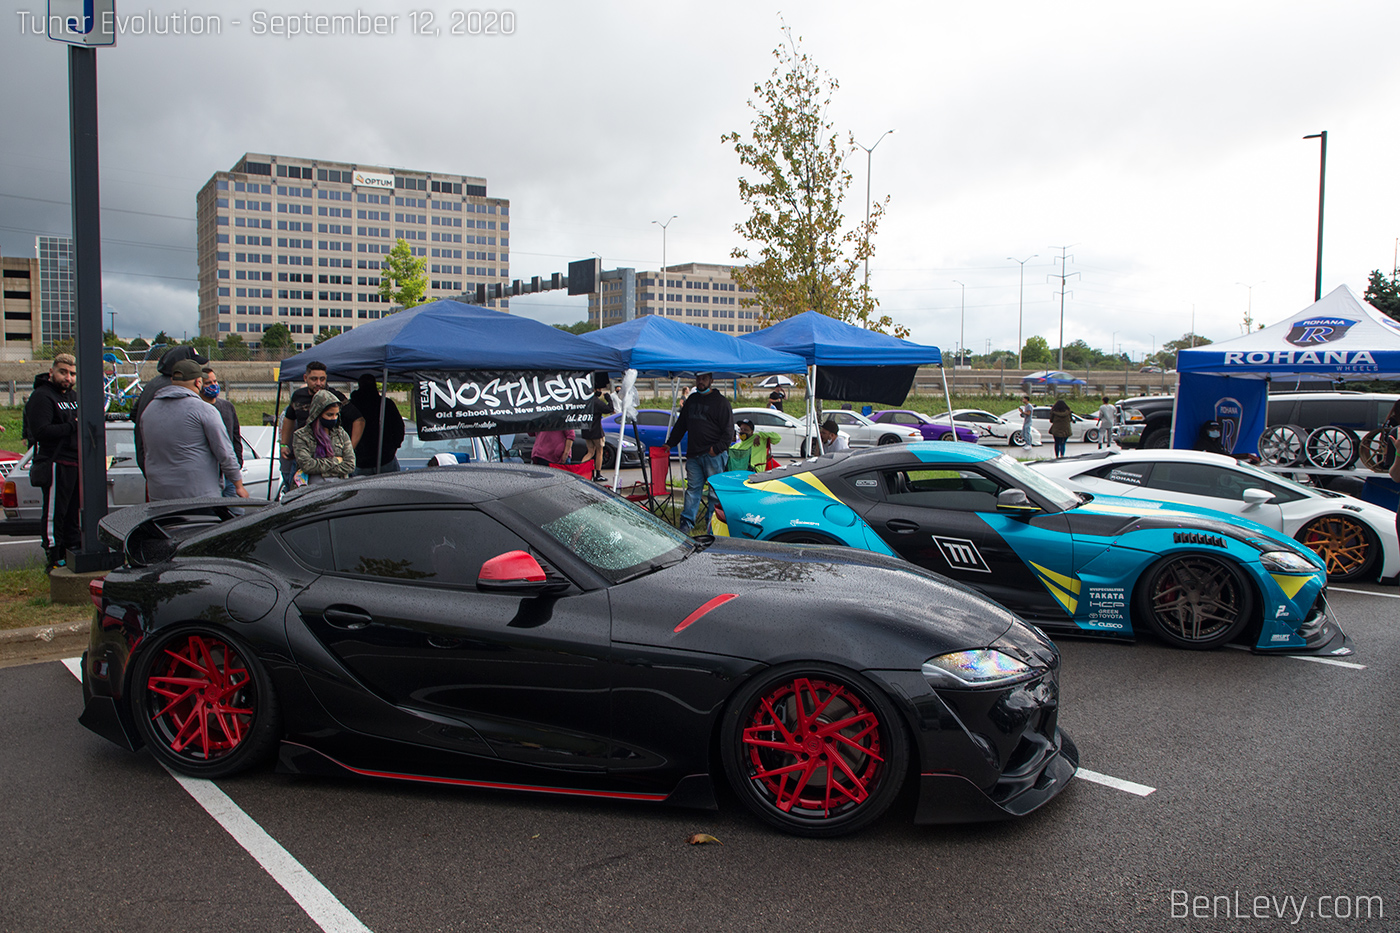 Toyota Supras at the Rohana booth at Tuner Evolution